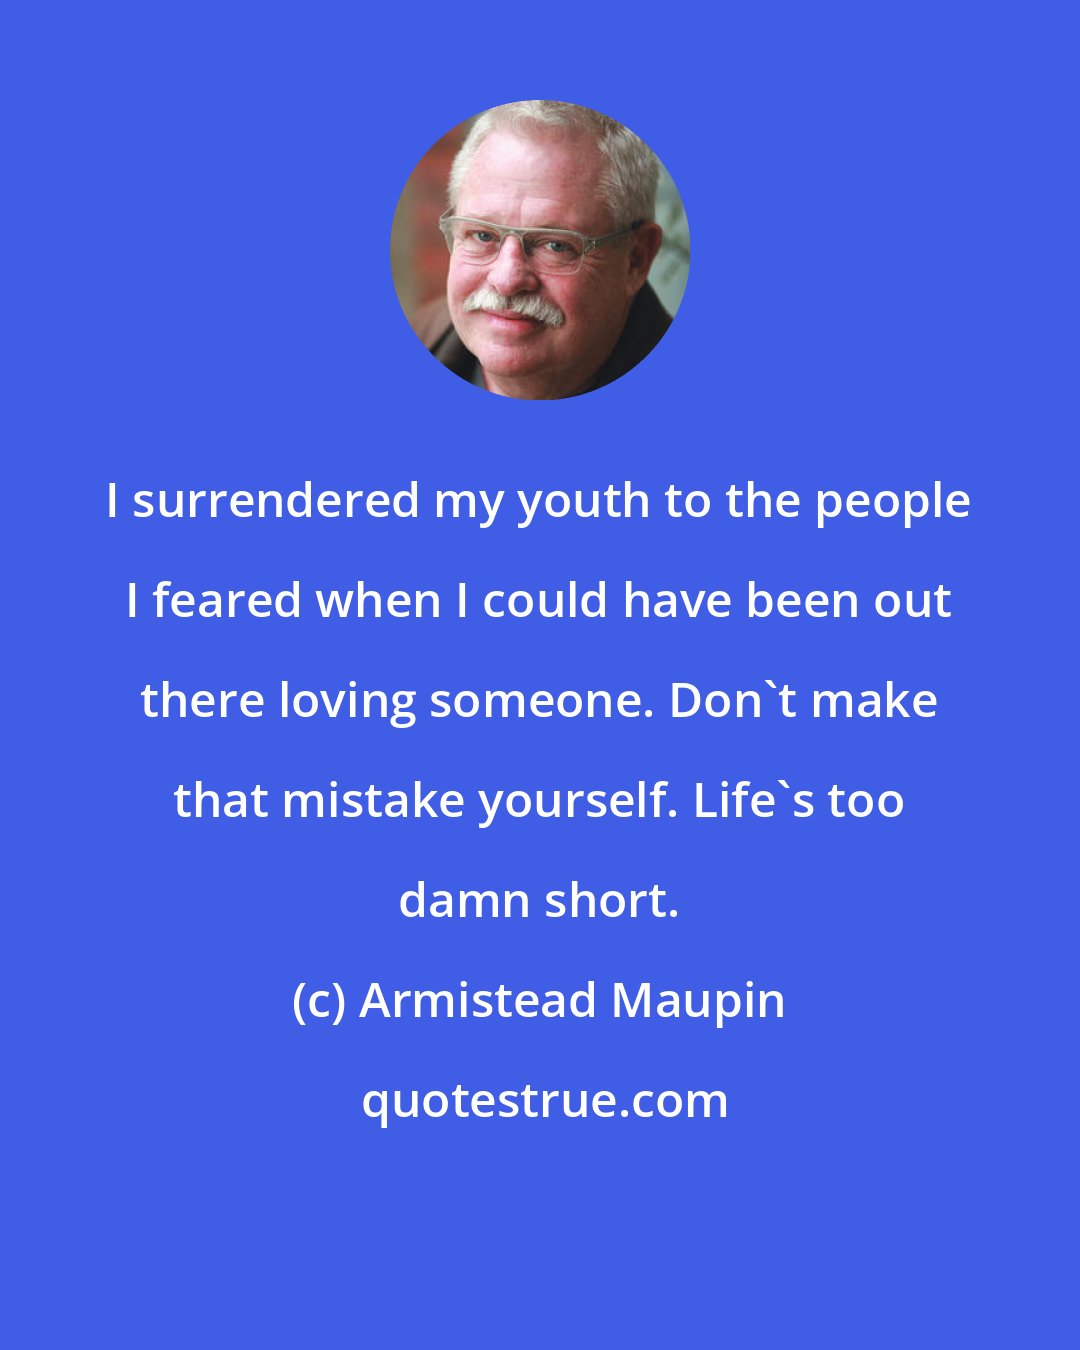 Armistead Maupin: I surrendered my youth to the people I feared when I could have been out there loving someone. Don't make that mistake yourself. Life's too damn short.